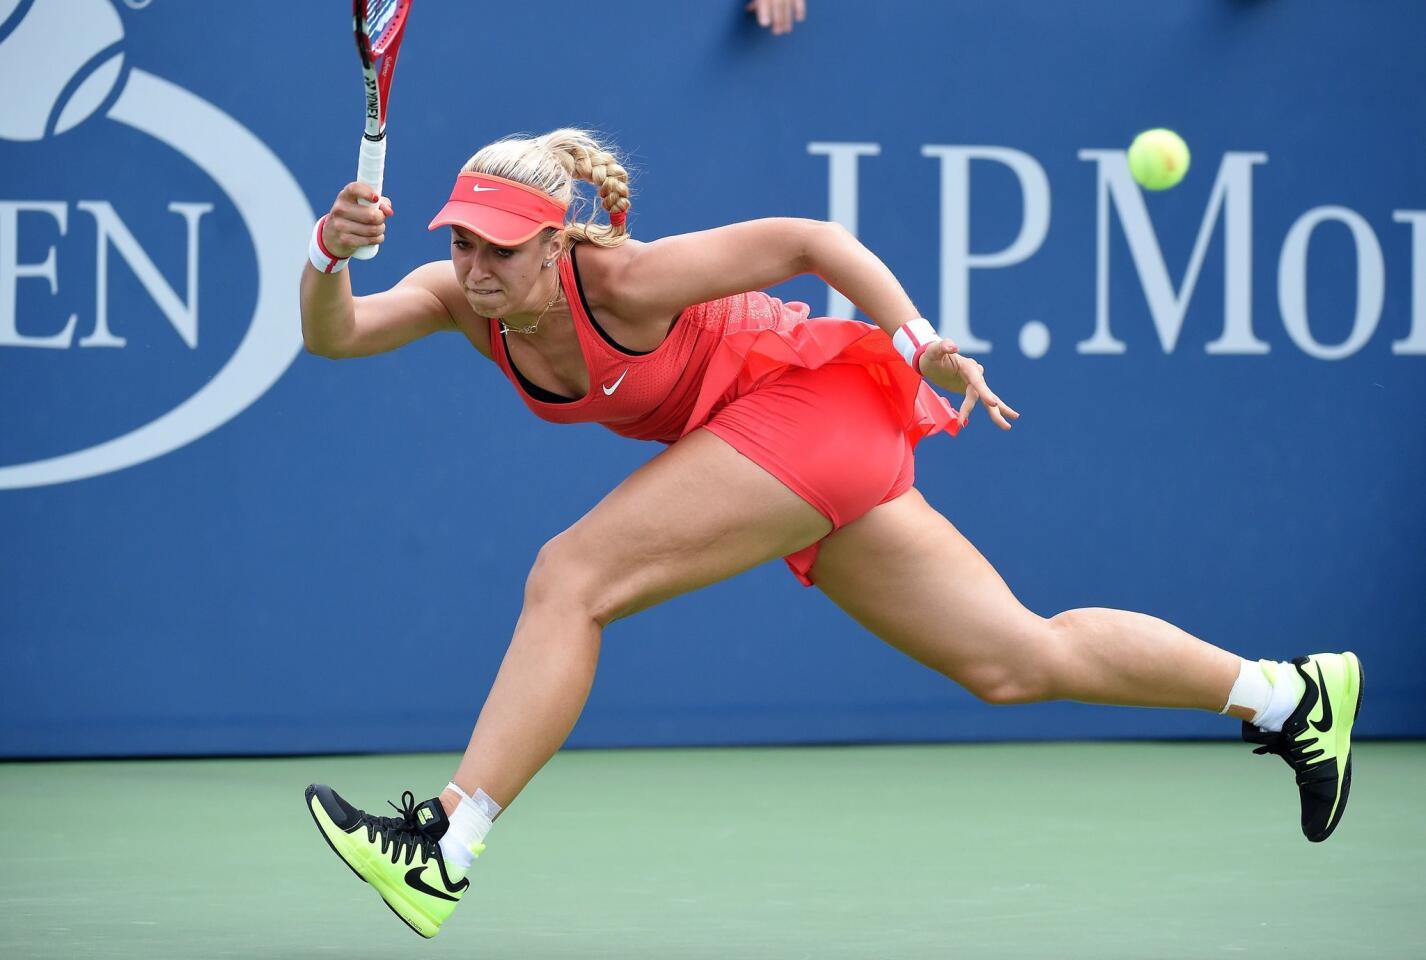 Sabine Lisicki of Germany returns to Camila Giorgi of Italy during their 2015 US Open women's singles round 2 match at USTA Billie Jean King National Tennis Center in New York on September 3, 2015. Lisicki won 6-4, 6-0. AFP PHOTO/JEWEL SAMADJEWEL SAMAD/AFP/Getty Images ** OUTS - ELSENT, FPG - OUTS * NM, PH, VA if sourced by CT, LA or MoD **